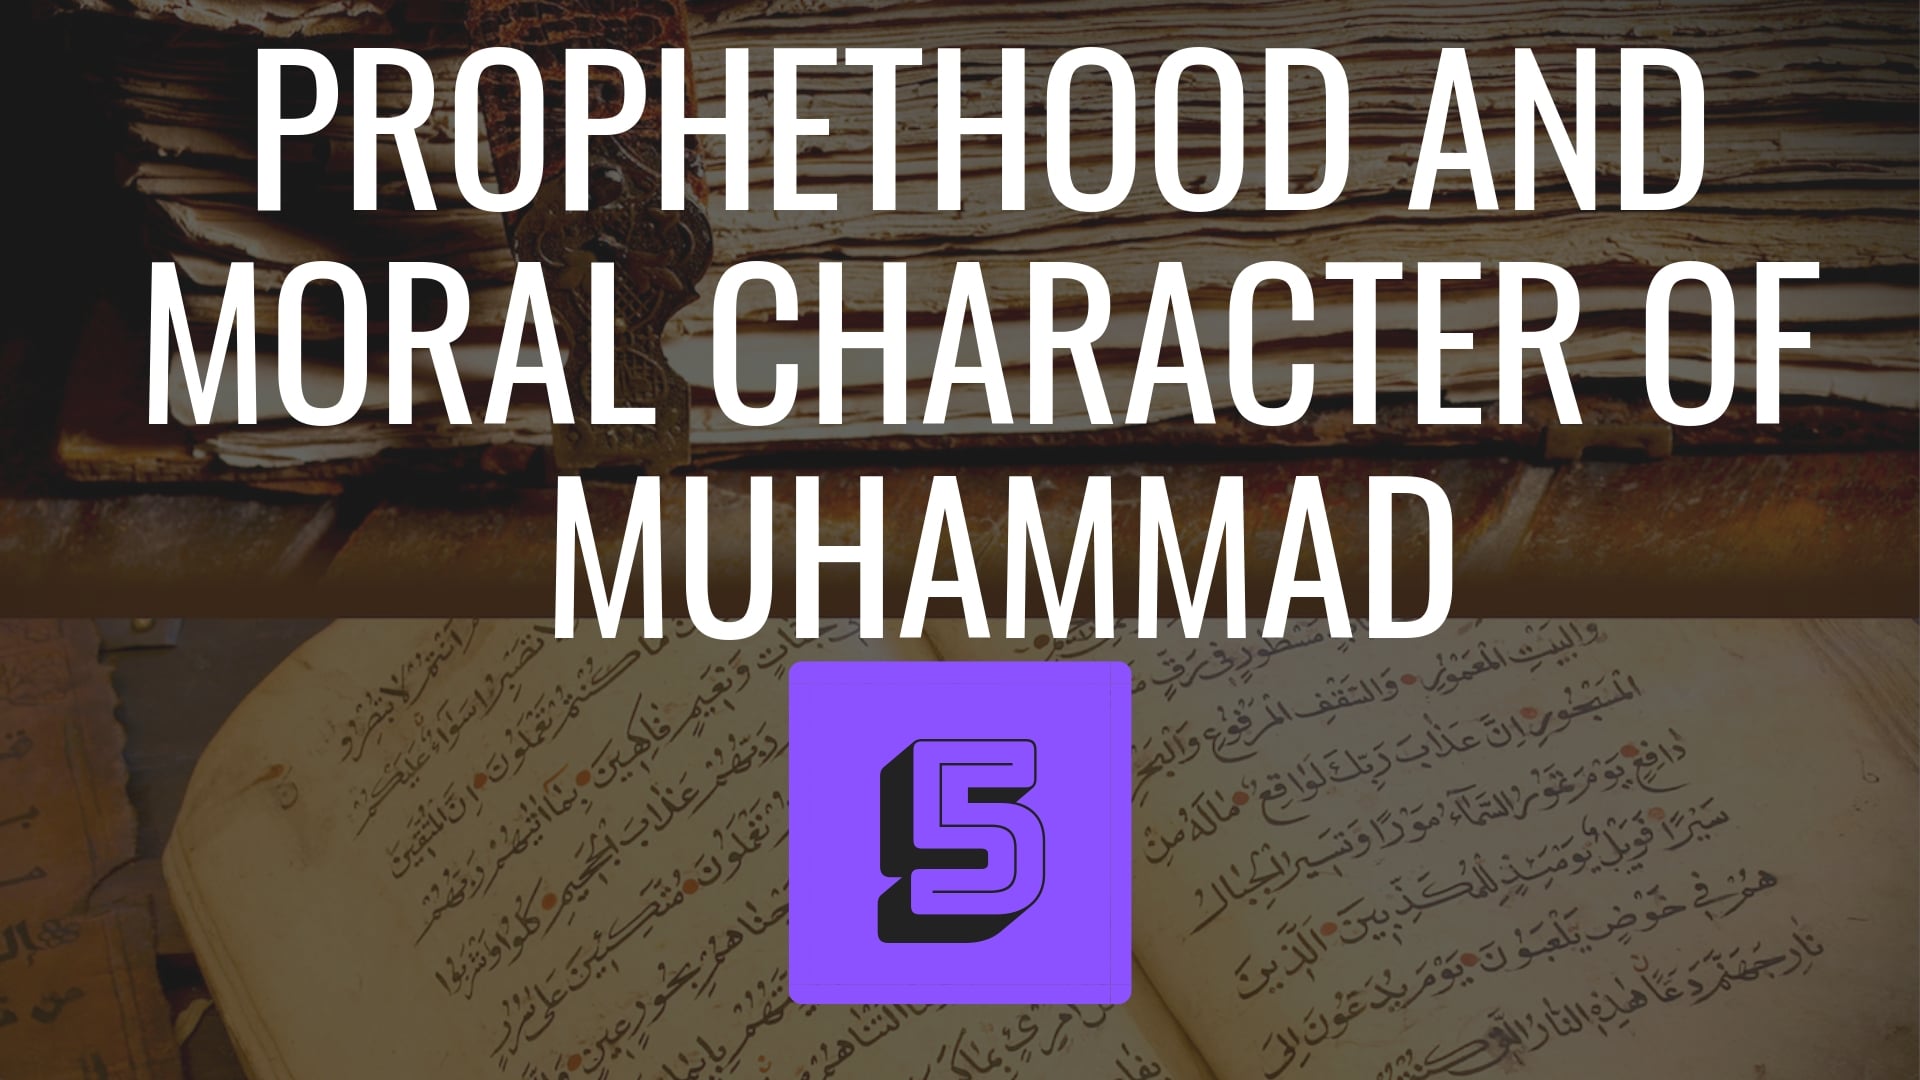 Muhammad’s Prophethood, and Moral Character